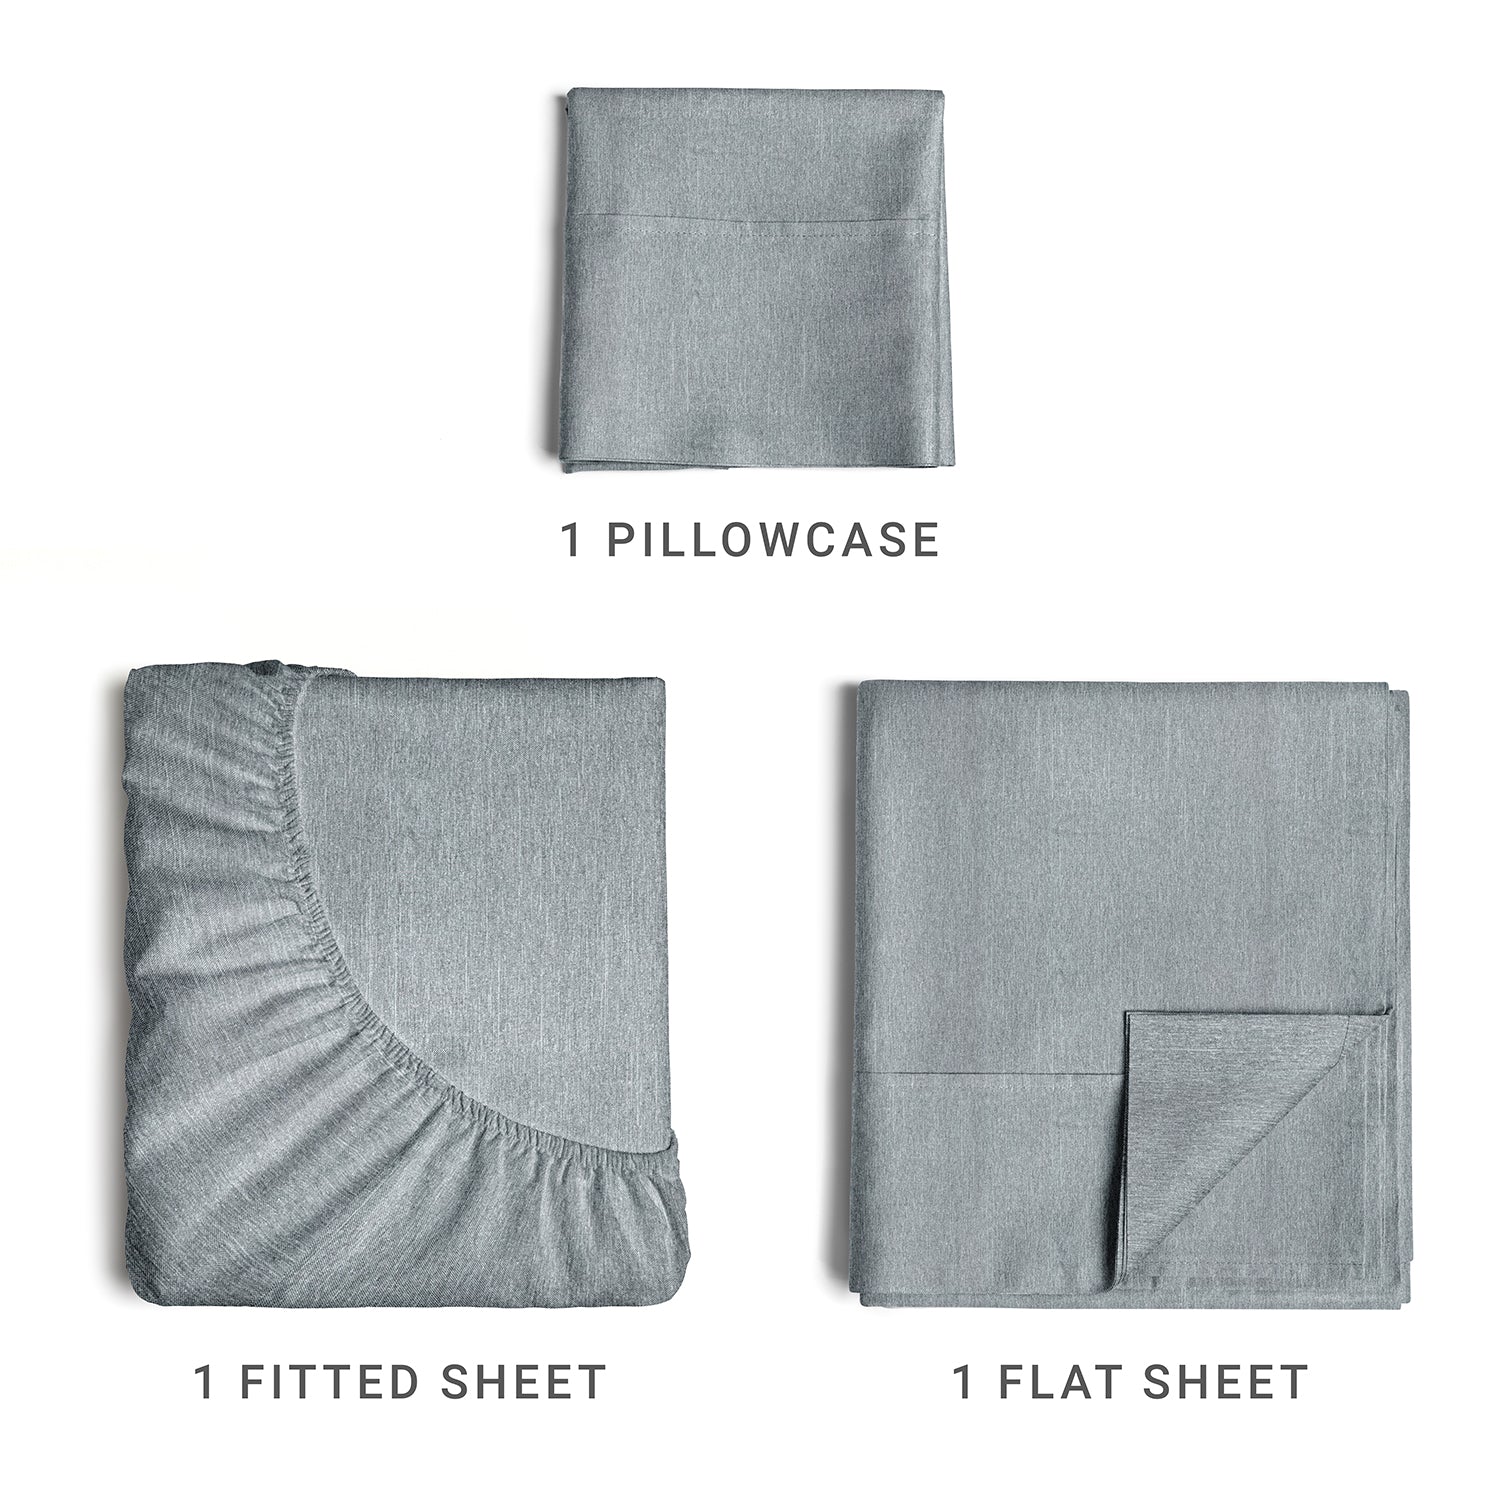 tes 4pc Sheet Set New Colors/Patterns - Heathered Blue